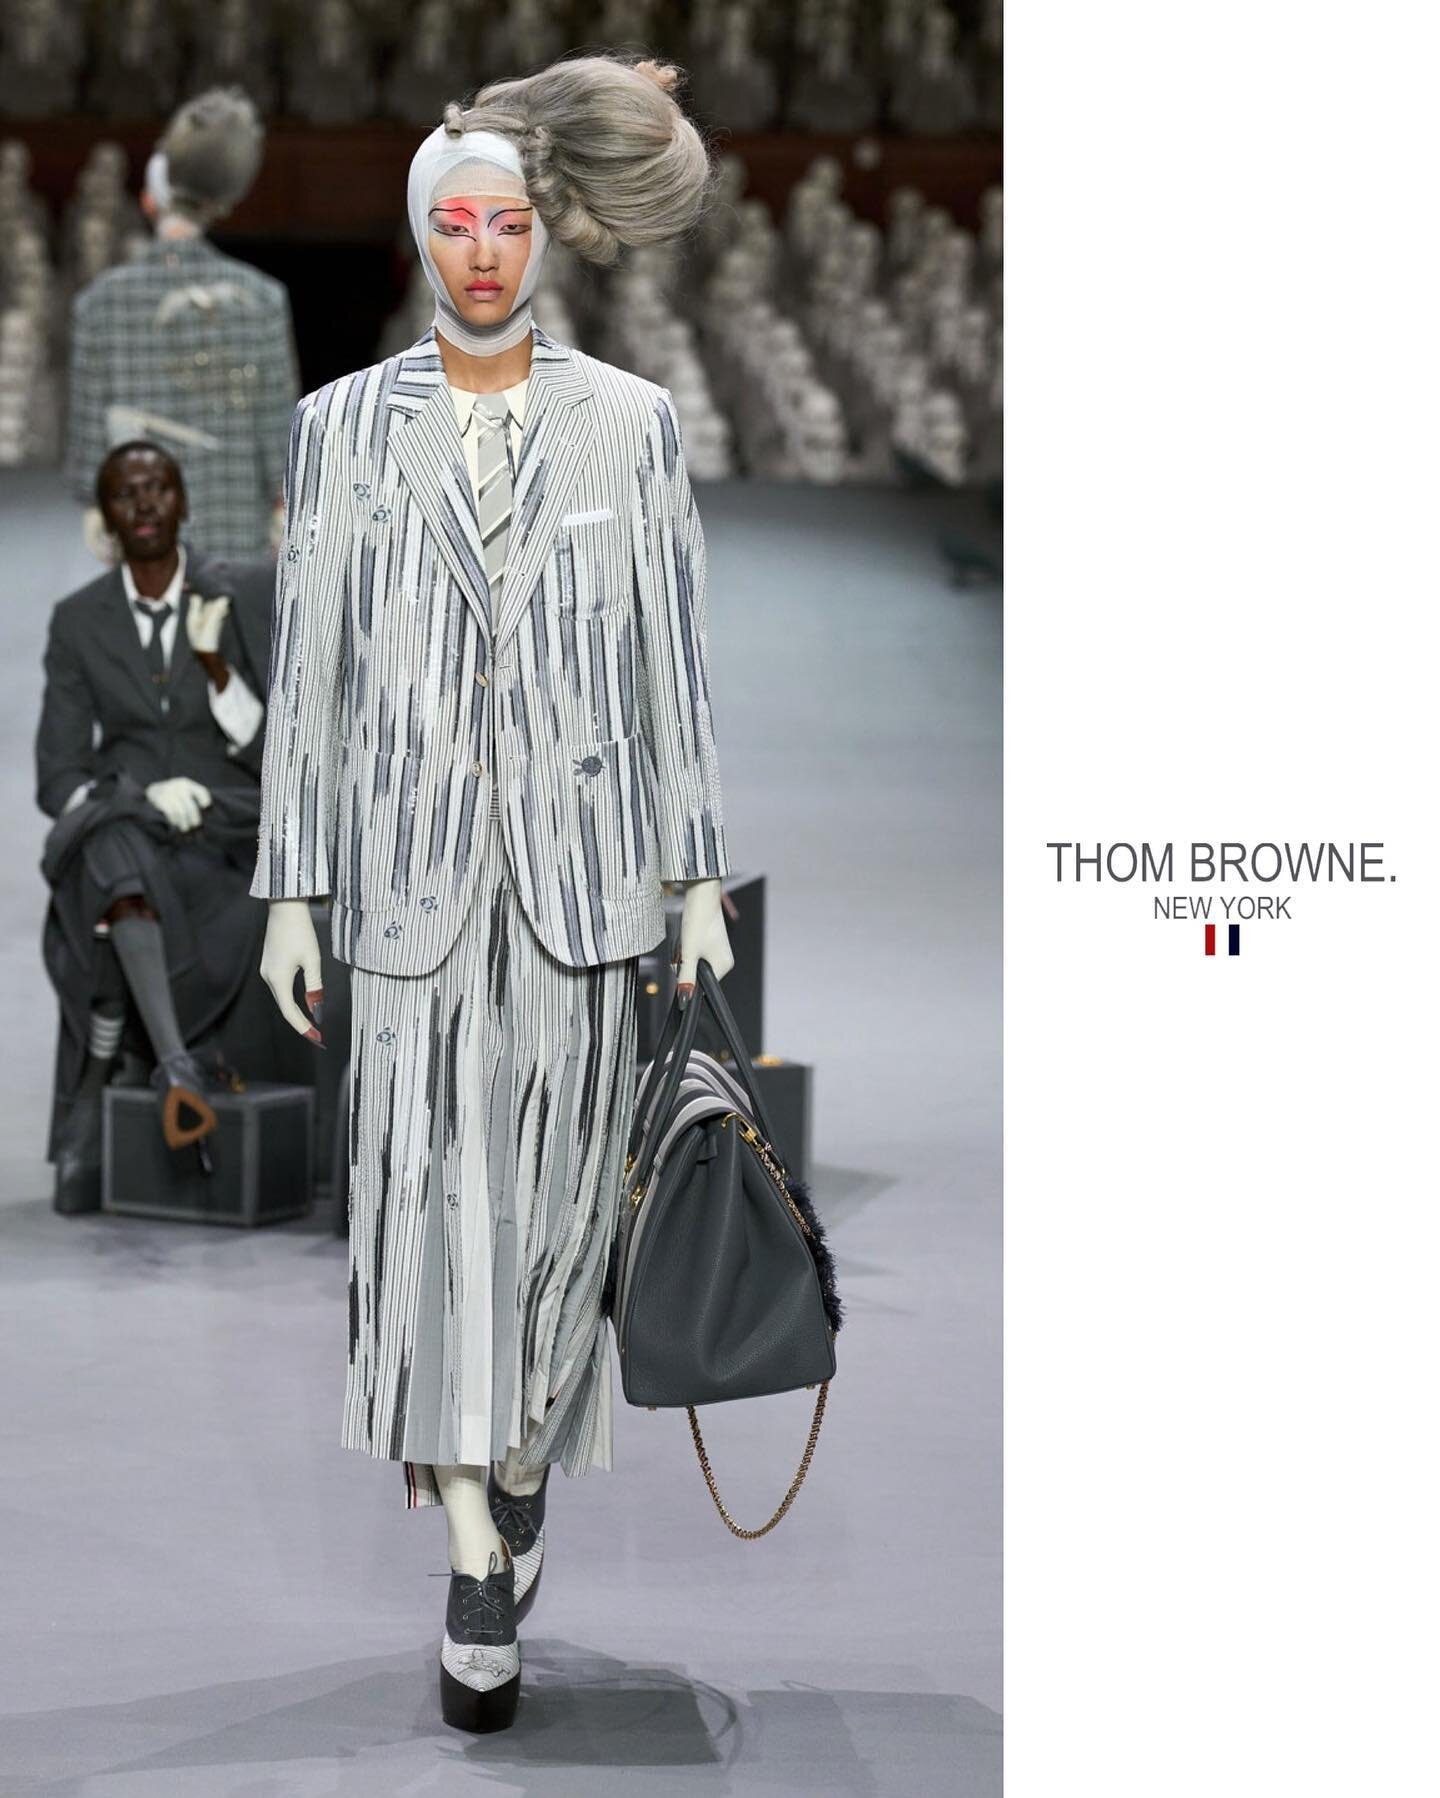 𝐓𝐇𝐎𝐌 𝐁𝐑𝐎𝐖𝐍𝐄 💎🚶🏻&zwj;♂️ 𝑯𝒚𝒖𝒏𝑱𝒖𝒏 𝑲𝒊𝒎 (@rlagusw.s) on the #runway in #Paris for @thombrowne 𝐅𝐚𝐥𝐥 𝟐𝟎𝟐𝟑 𝐇𝐚𝐮𝐭𝐞 𝐂𝐨𝐮𝐭𝐮𝐫𝐞 𝐂𝐨𝐥𝐥𝐞𝐜𝐭𝐢𝐨𝐧 🙌👏⭐️
⠀
💆🏽&zwj;♂️ @eugenesouleiman 
💄 @isamayaffrench 
✍️ @adamhindle